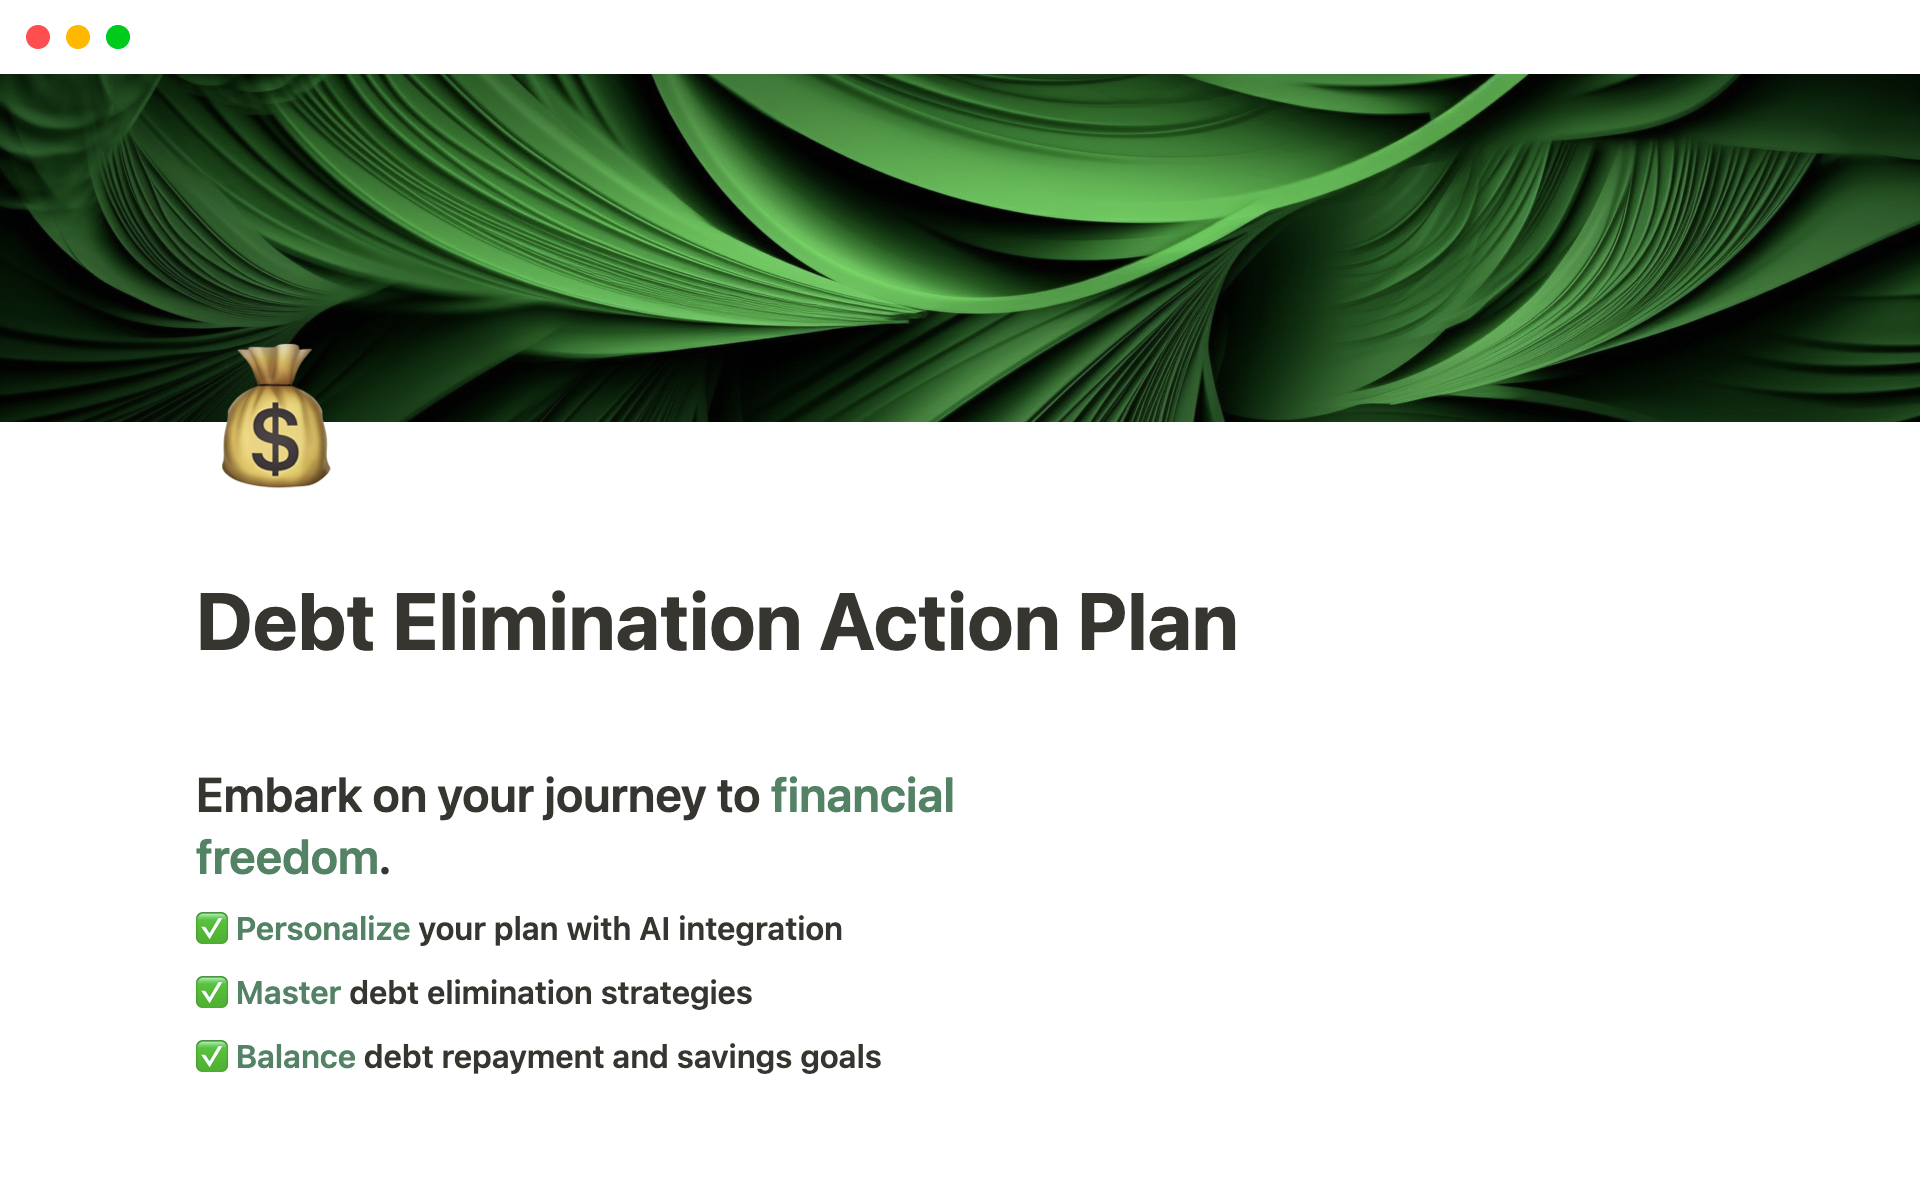 Learn how to eliminate debt and put together a comprehensive plan using Notion AI.